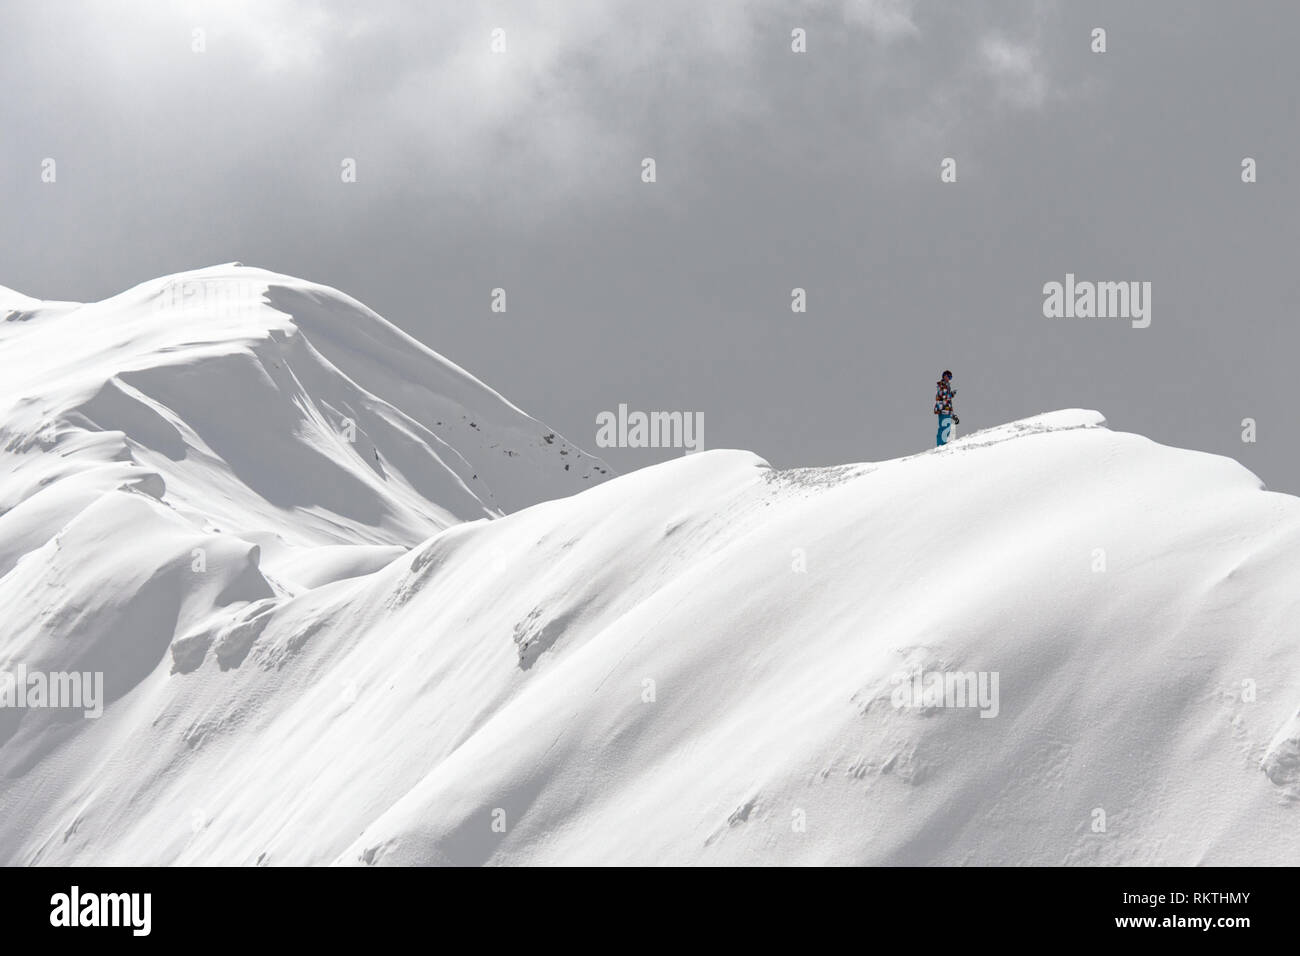 A stranded man on the snowy ridge of a mountain holding a cell phone trying to call Stock Photo